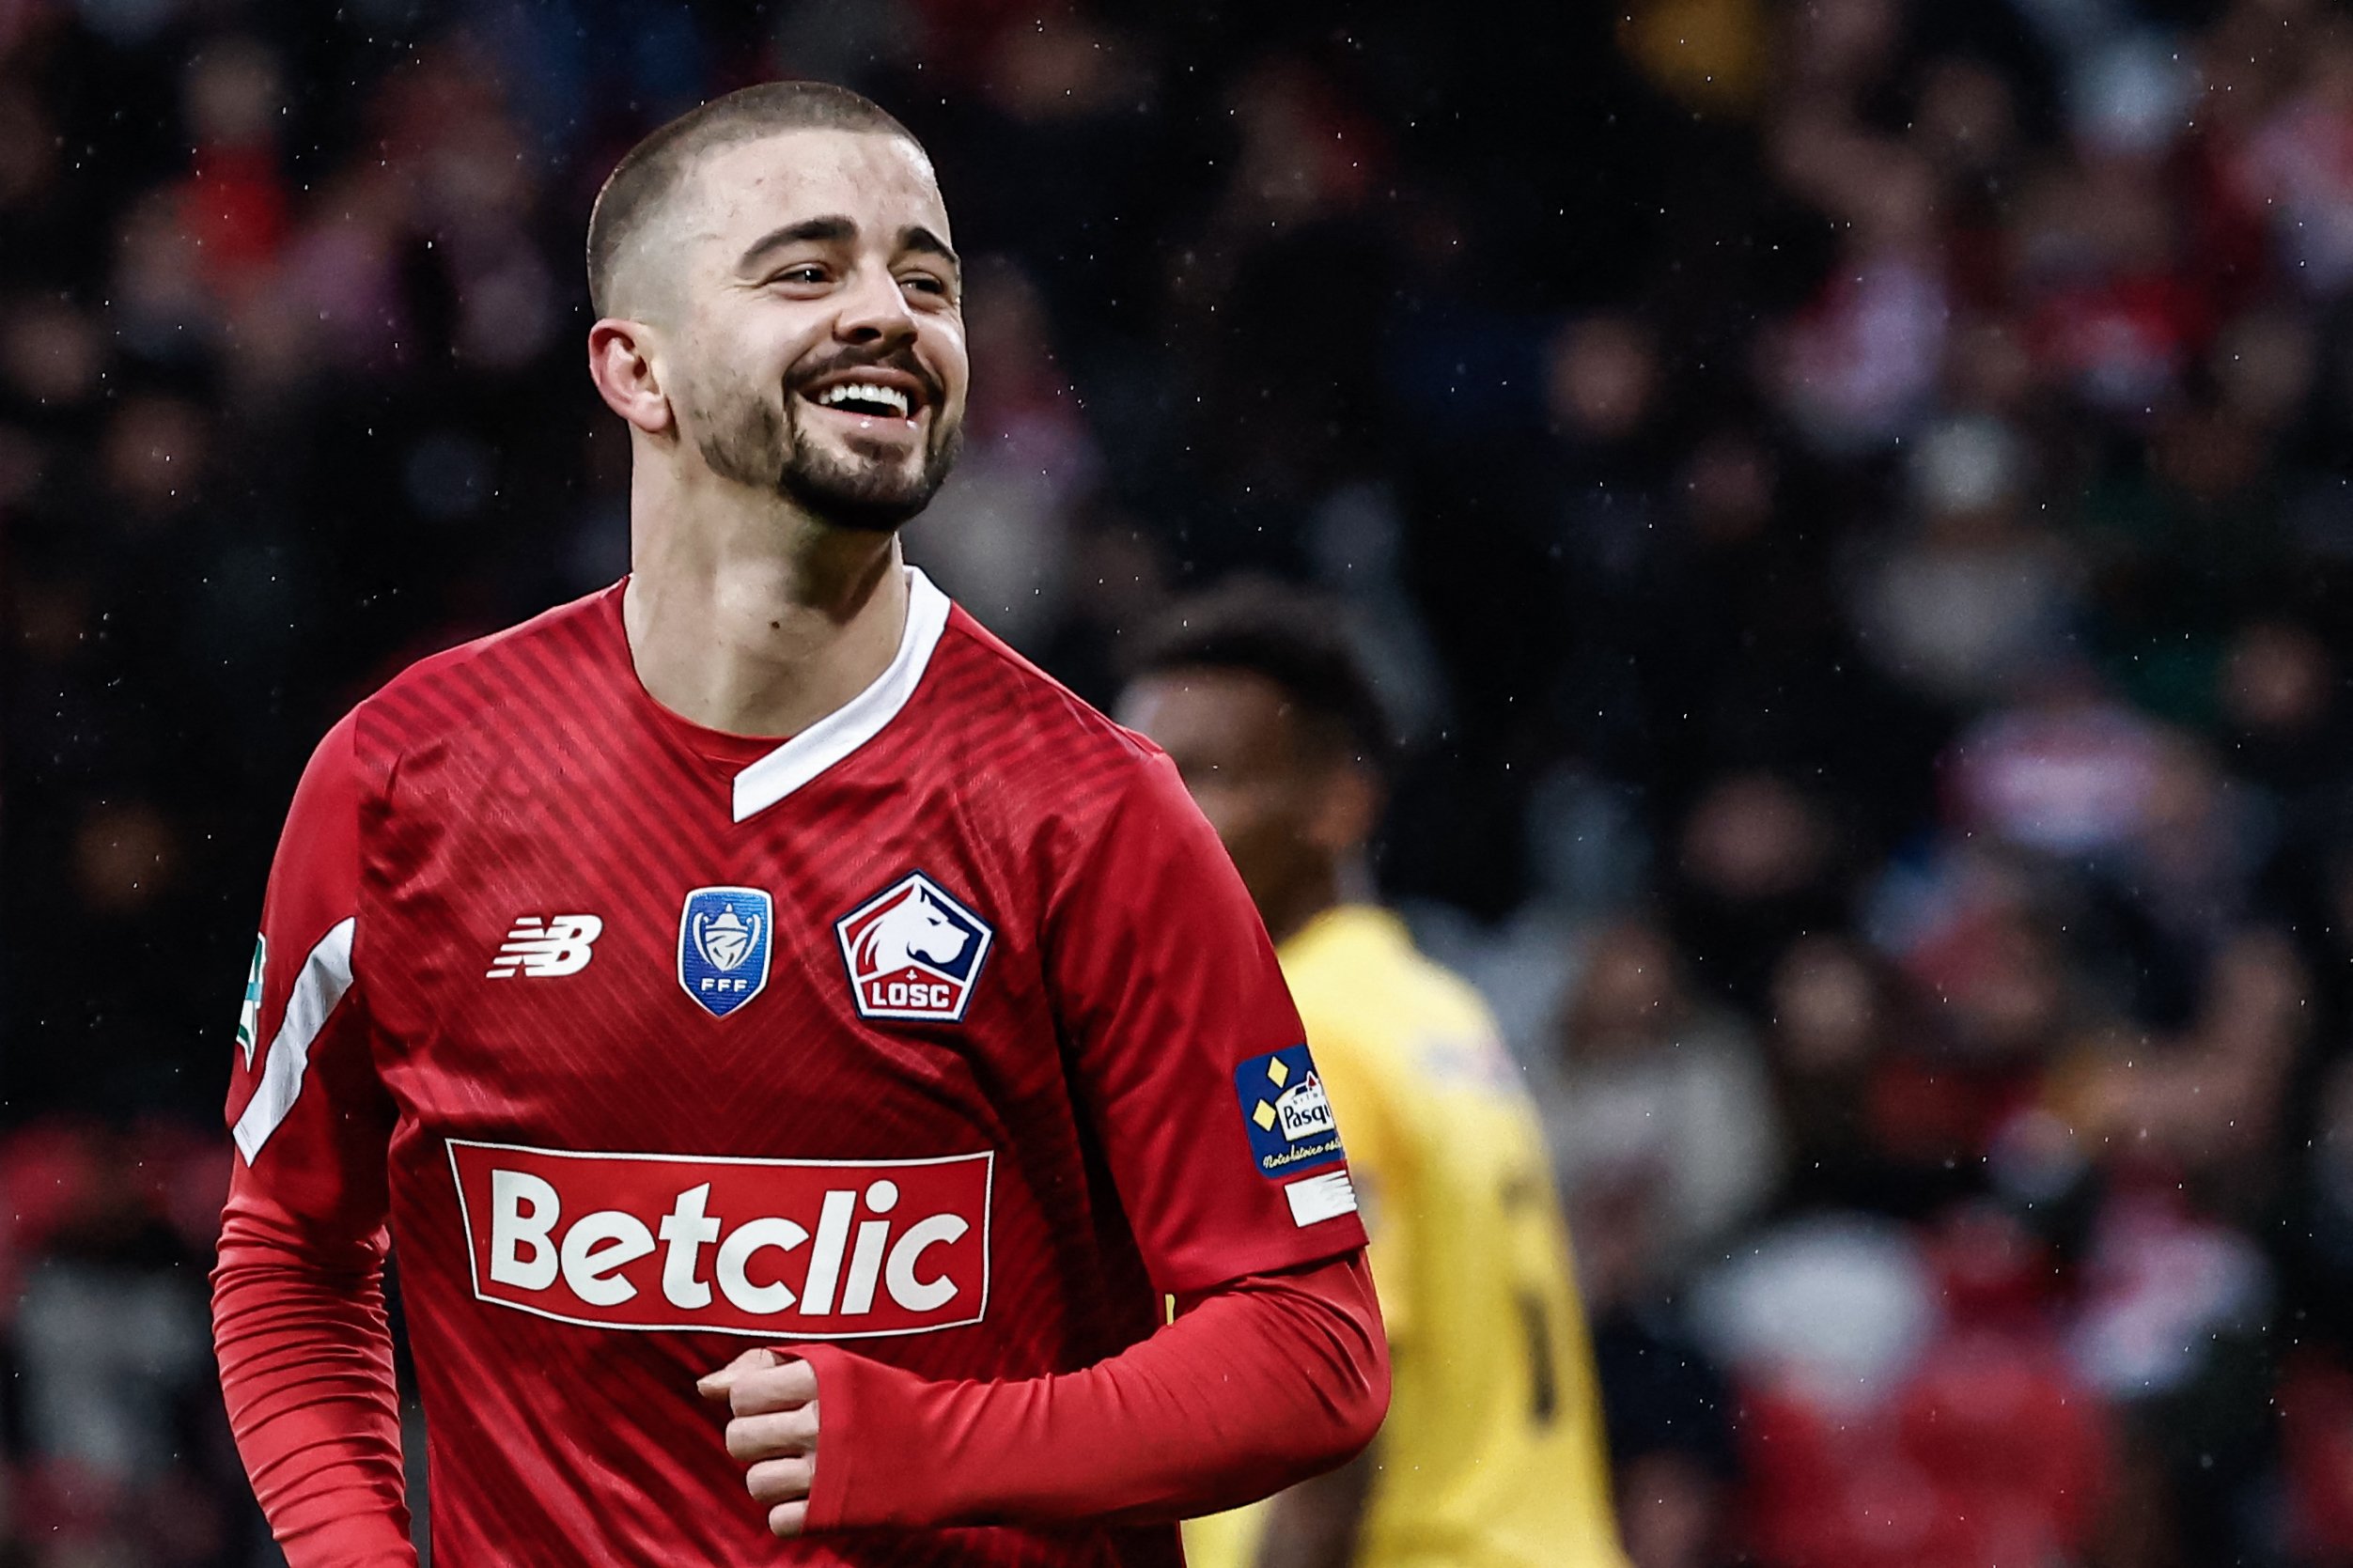 Juventus are expected to overhaul their wings in the summer and have inserted Edon Zhegrova in their shortlist. The 25-year-old is having a stellar season.